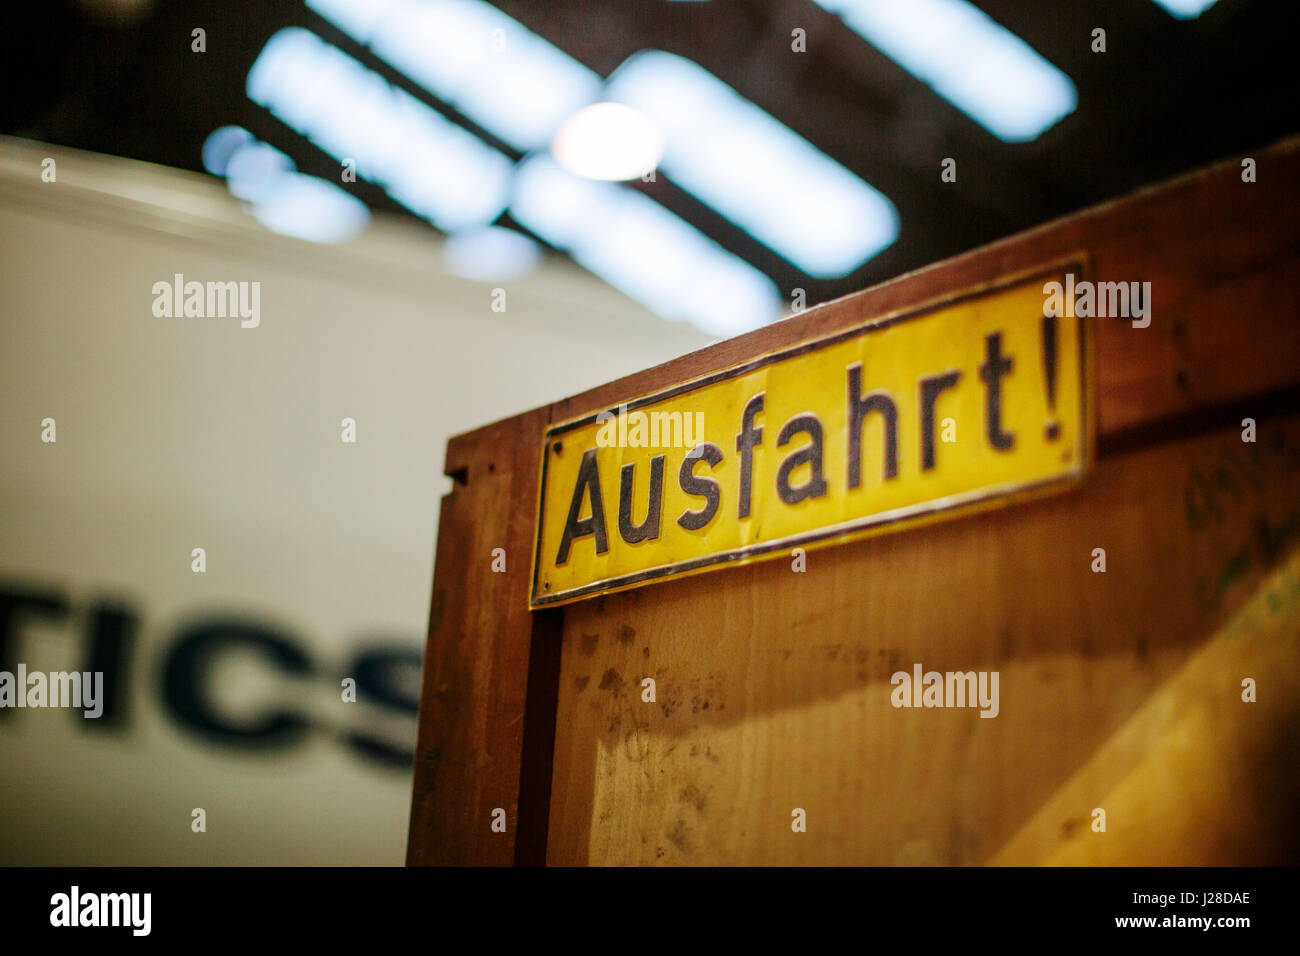 Ausfahrt Sign in a haulage company warehouse in Northern England Stock Photo